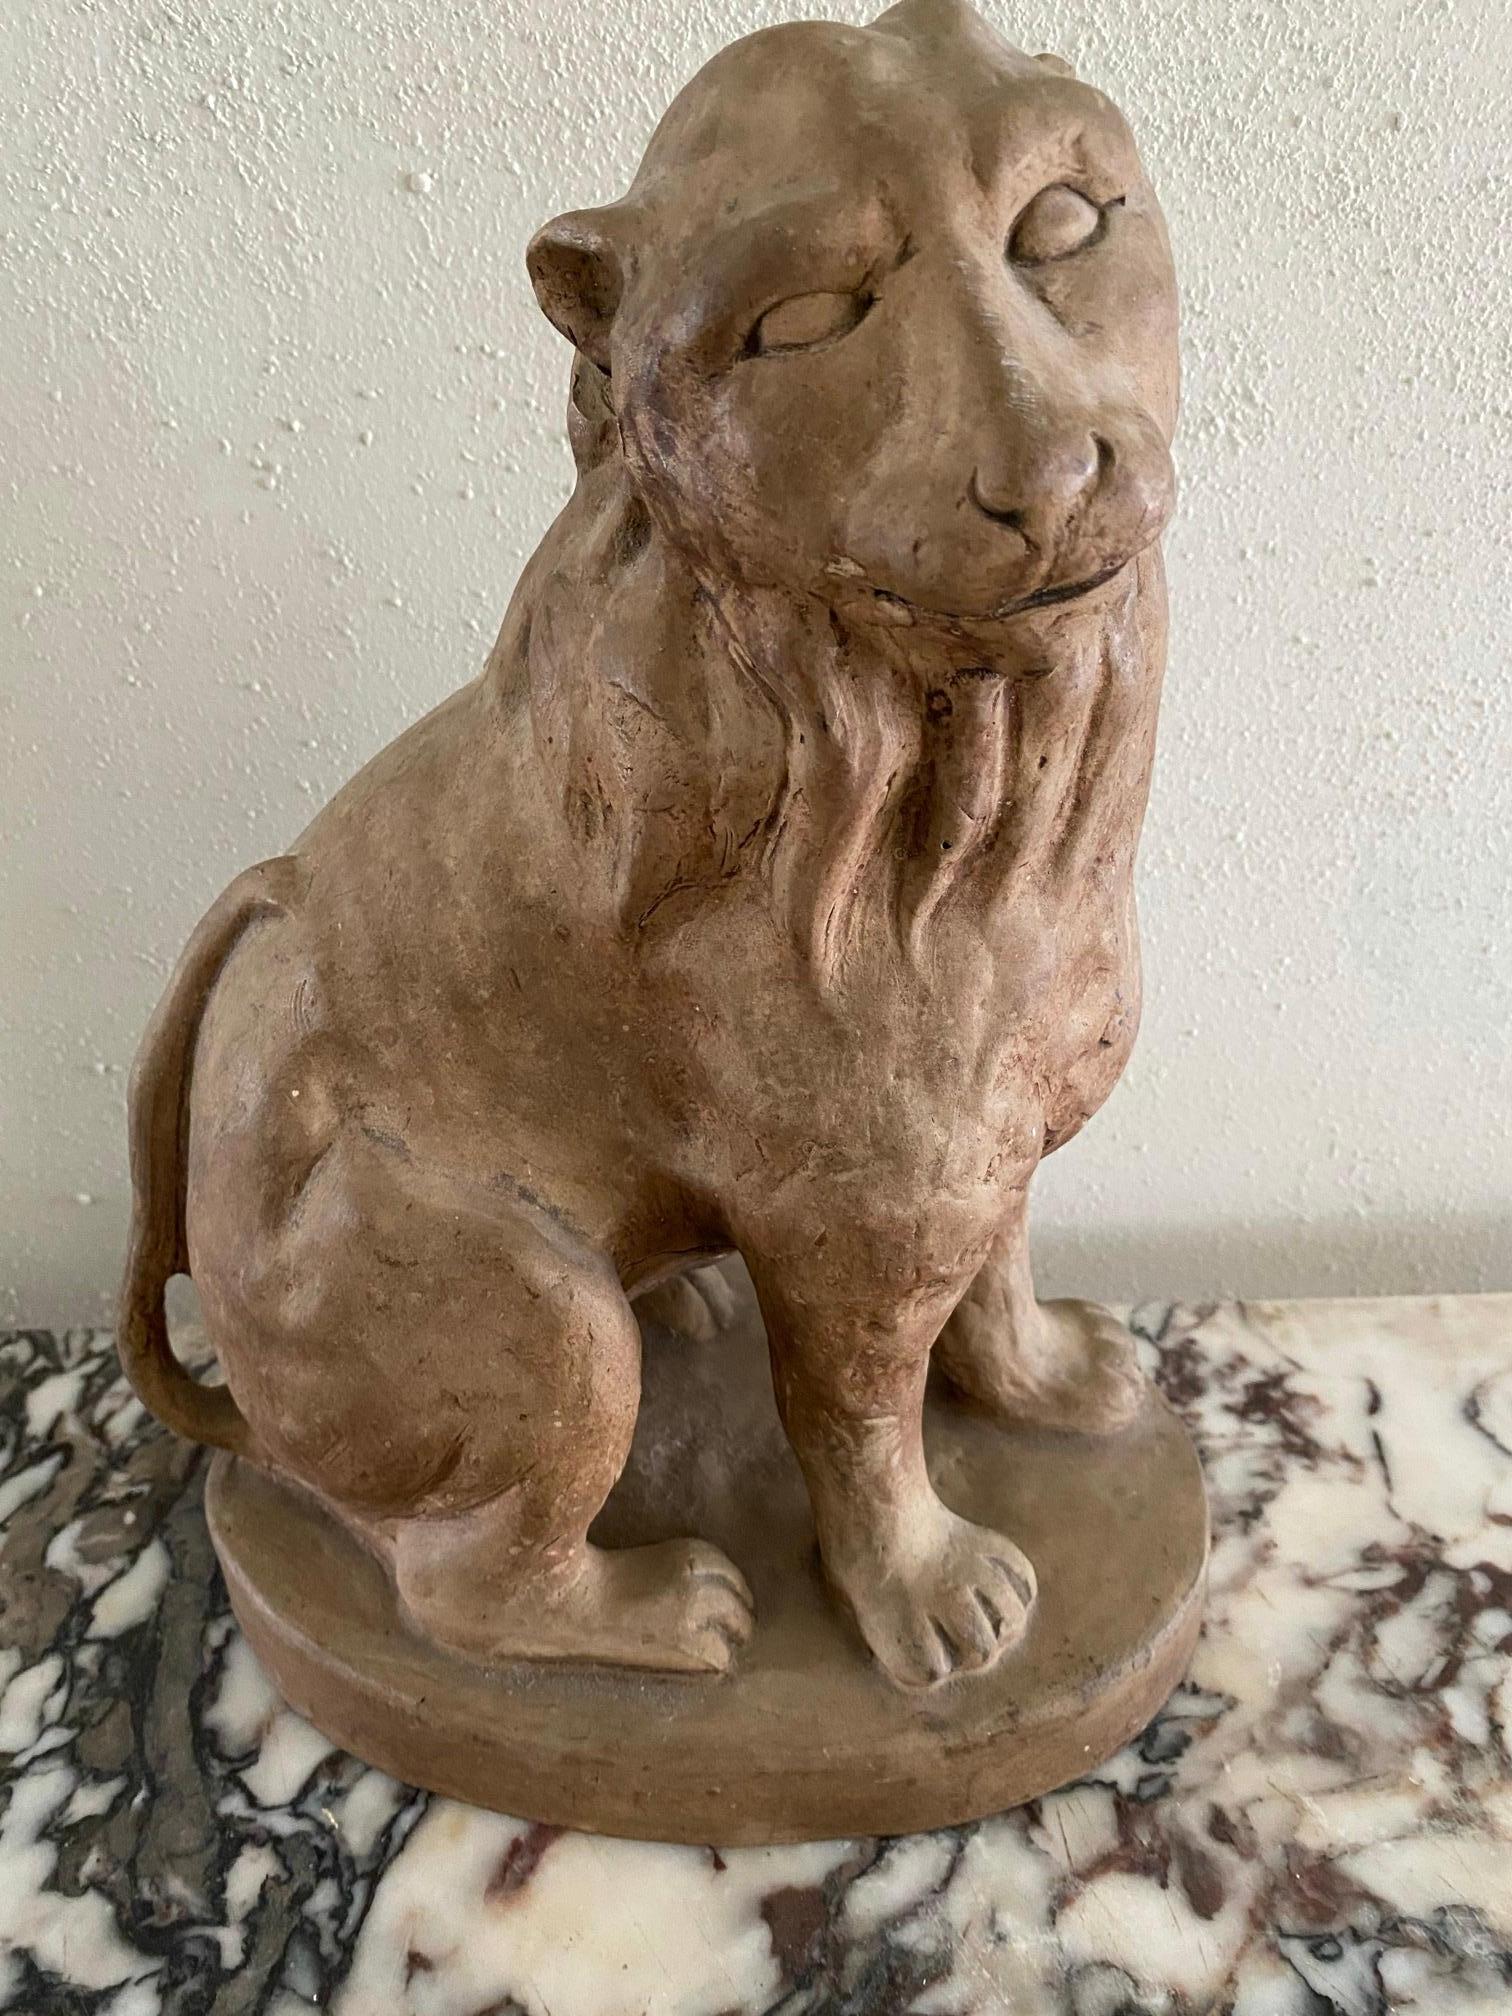 Clay figure of a seated lion with a sweet countenance.